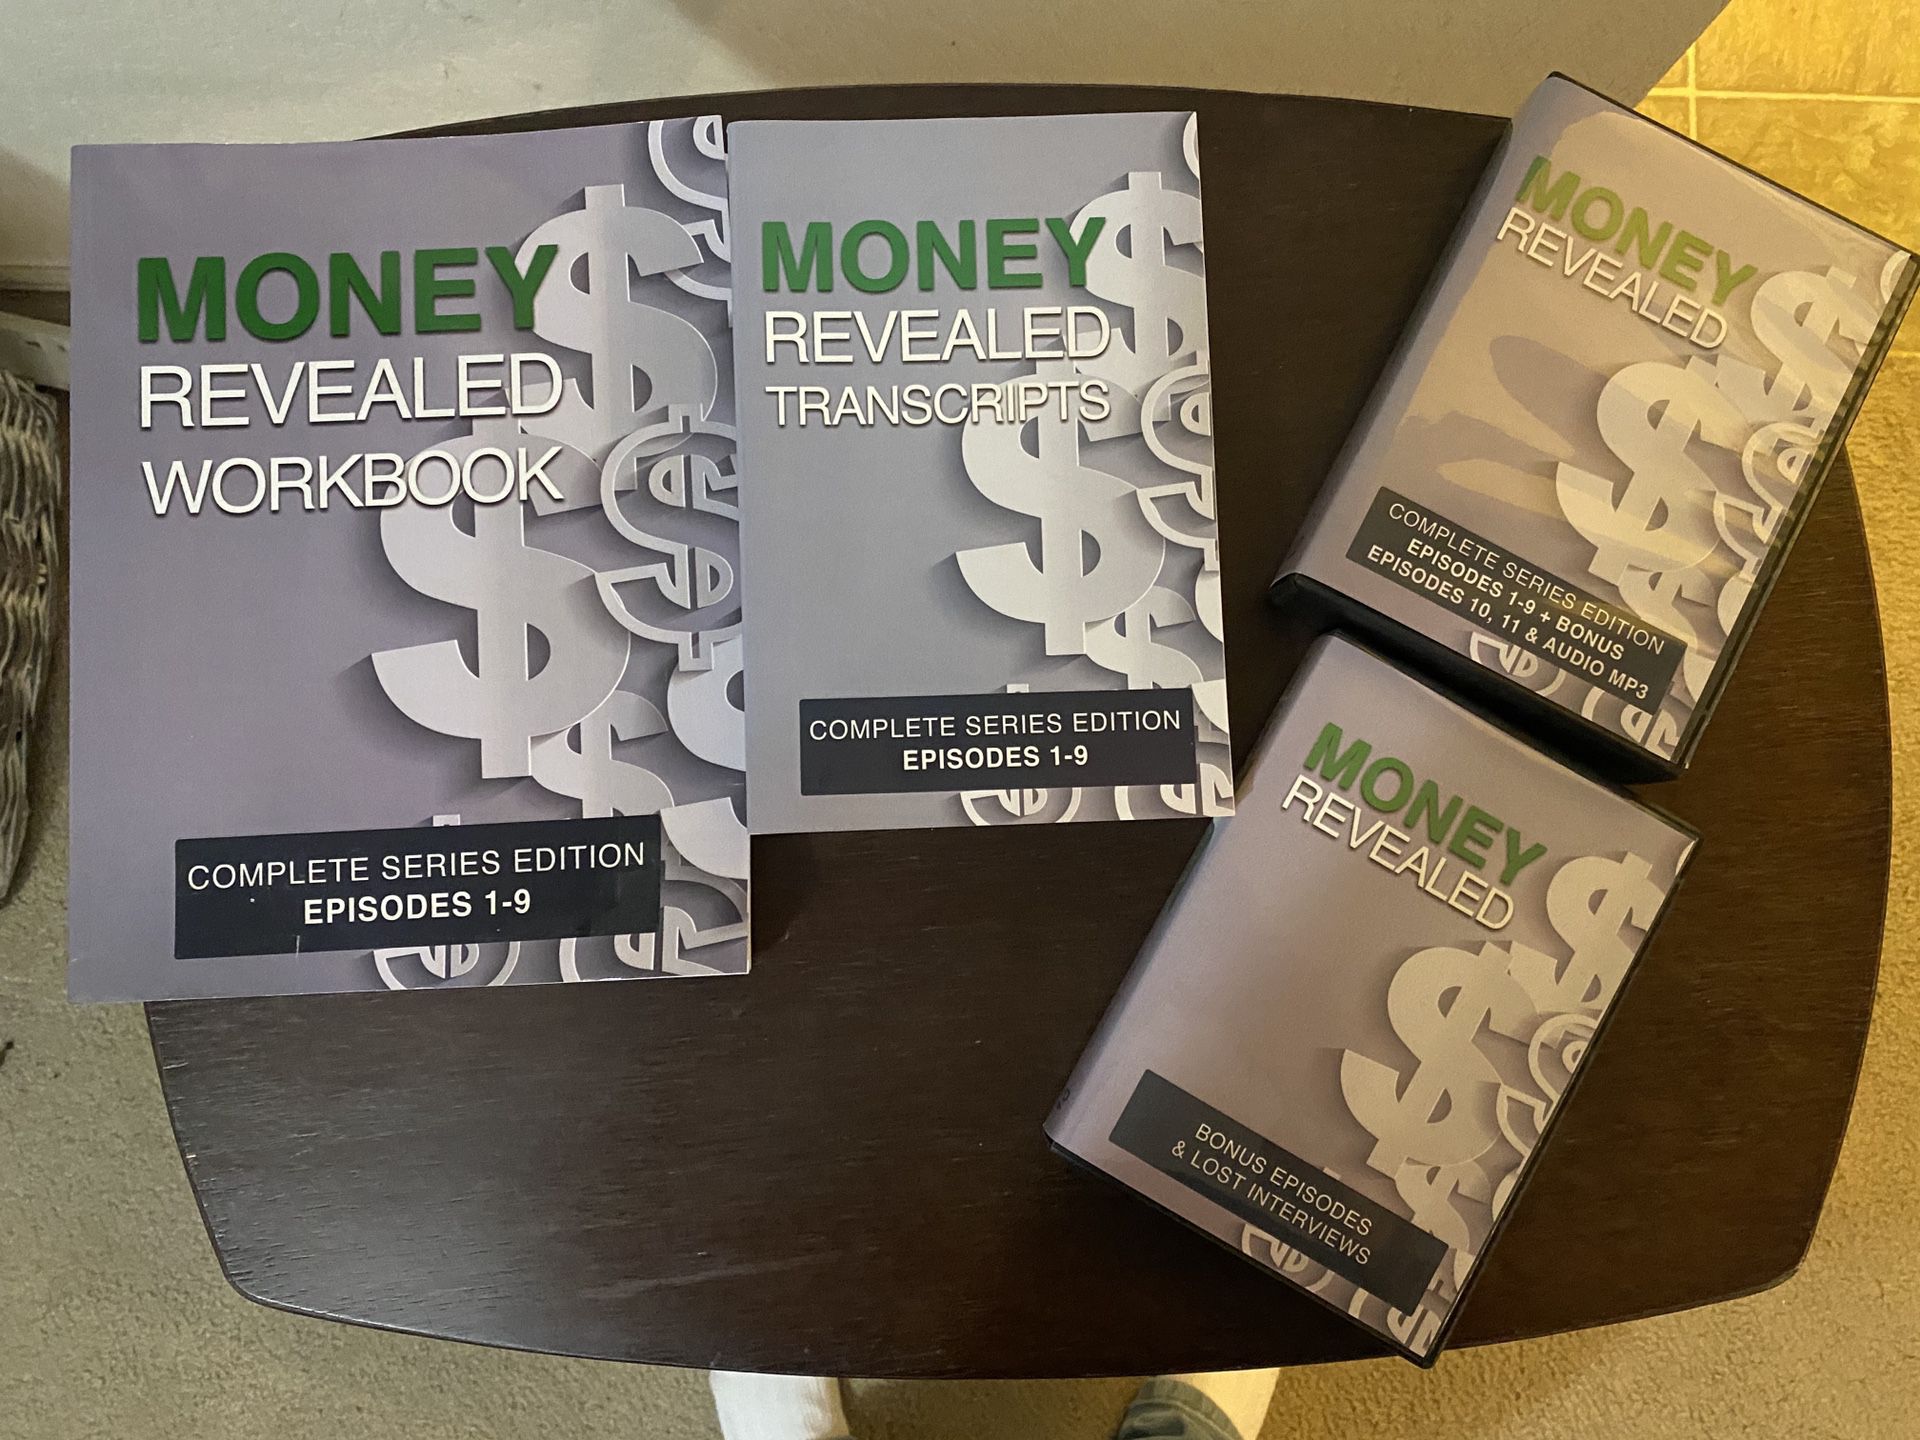 “Money Revealed” books and CDs